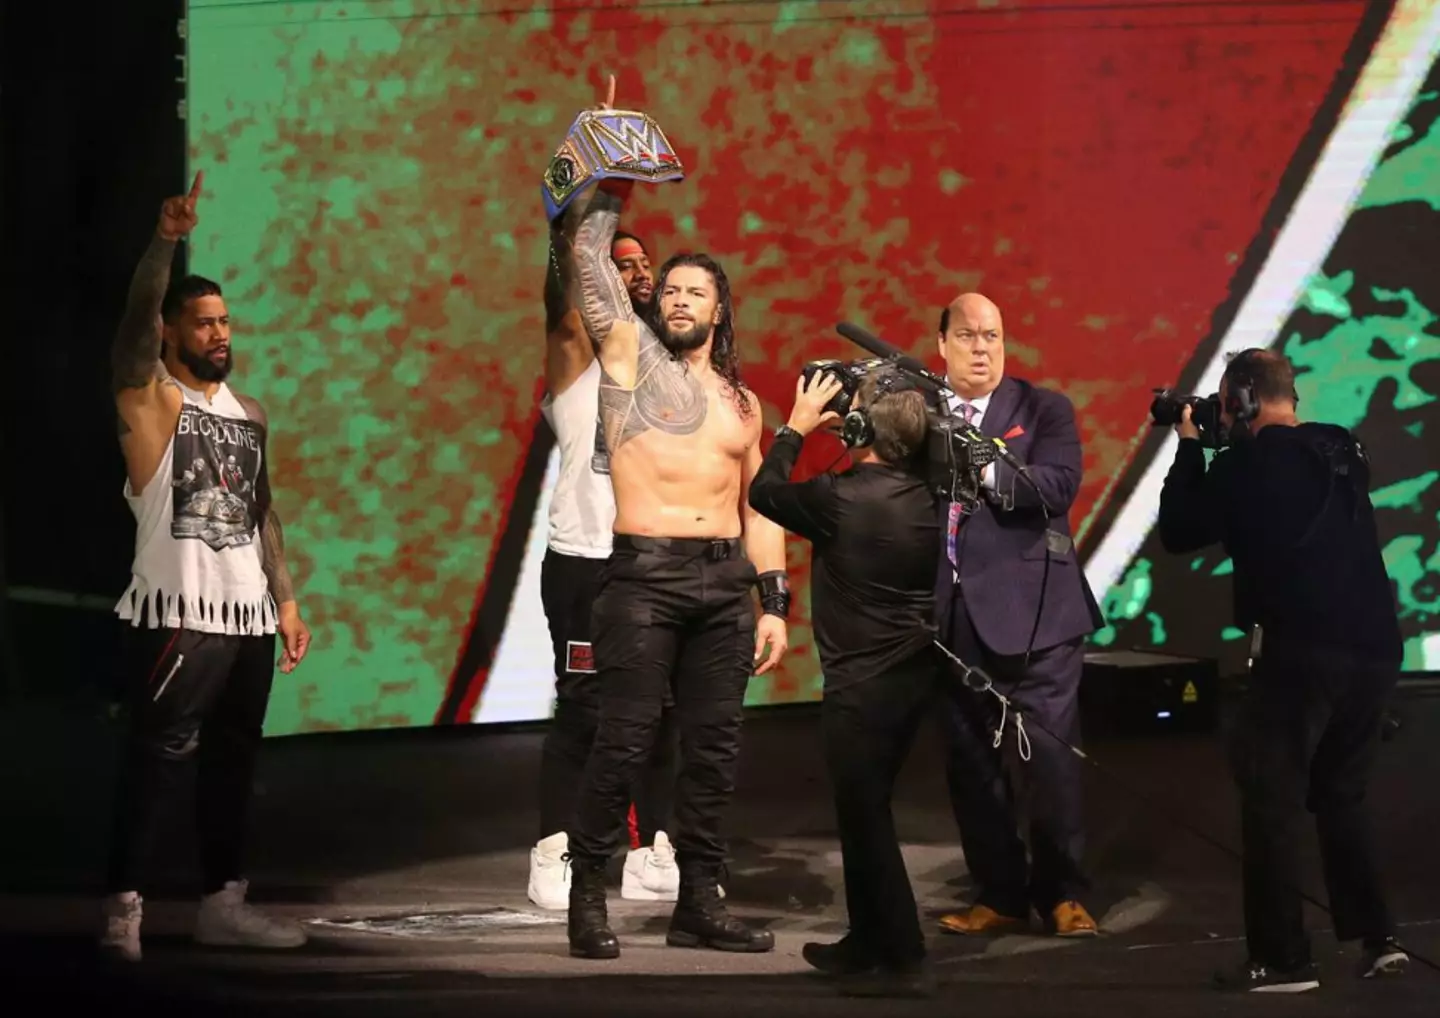 Roman Reigns at 2021 Crown Jewel event.